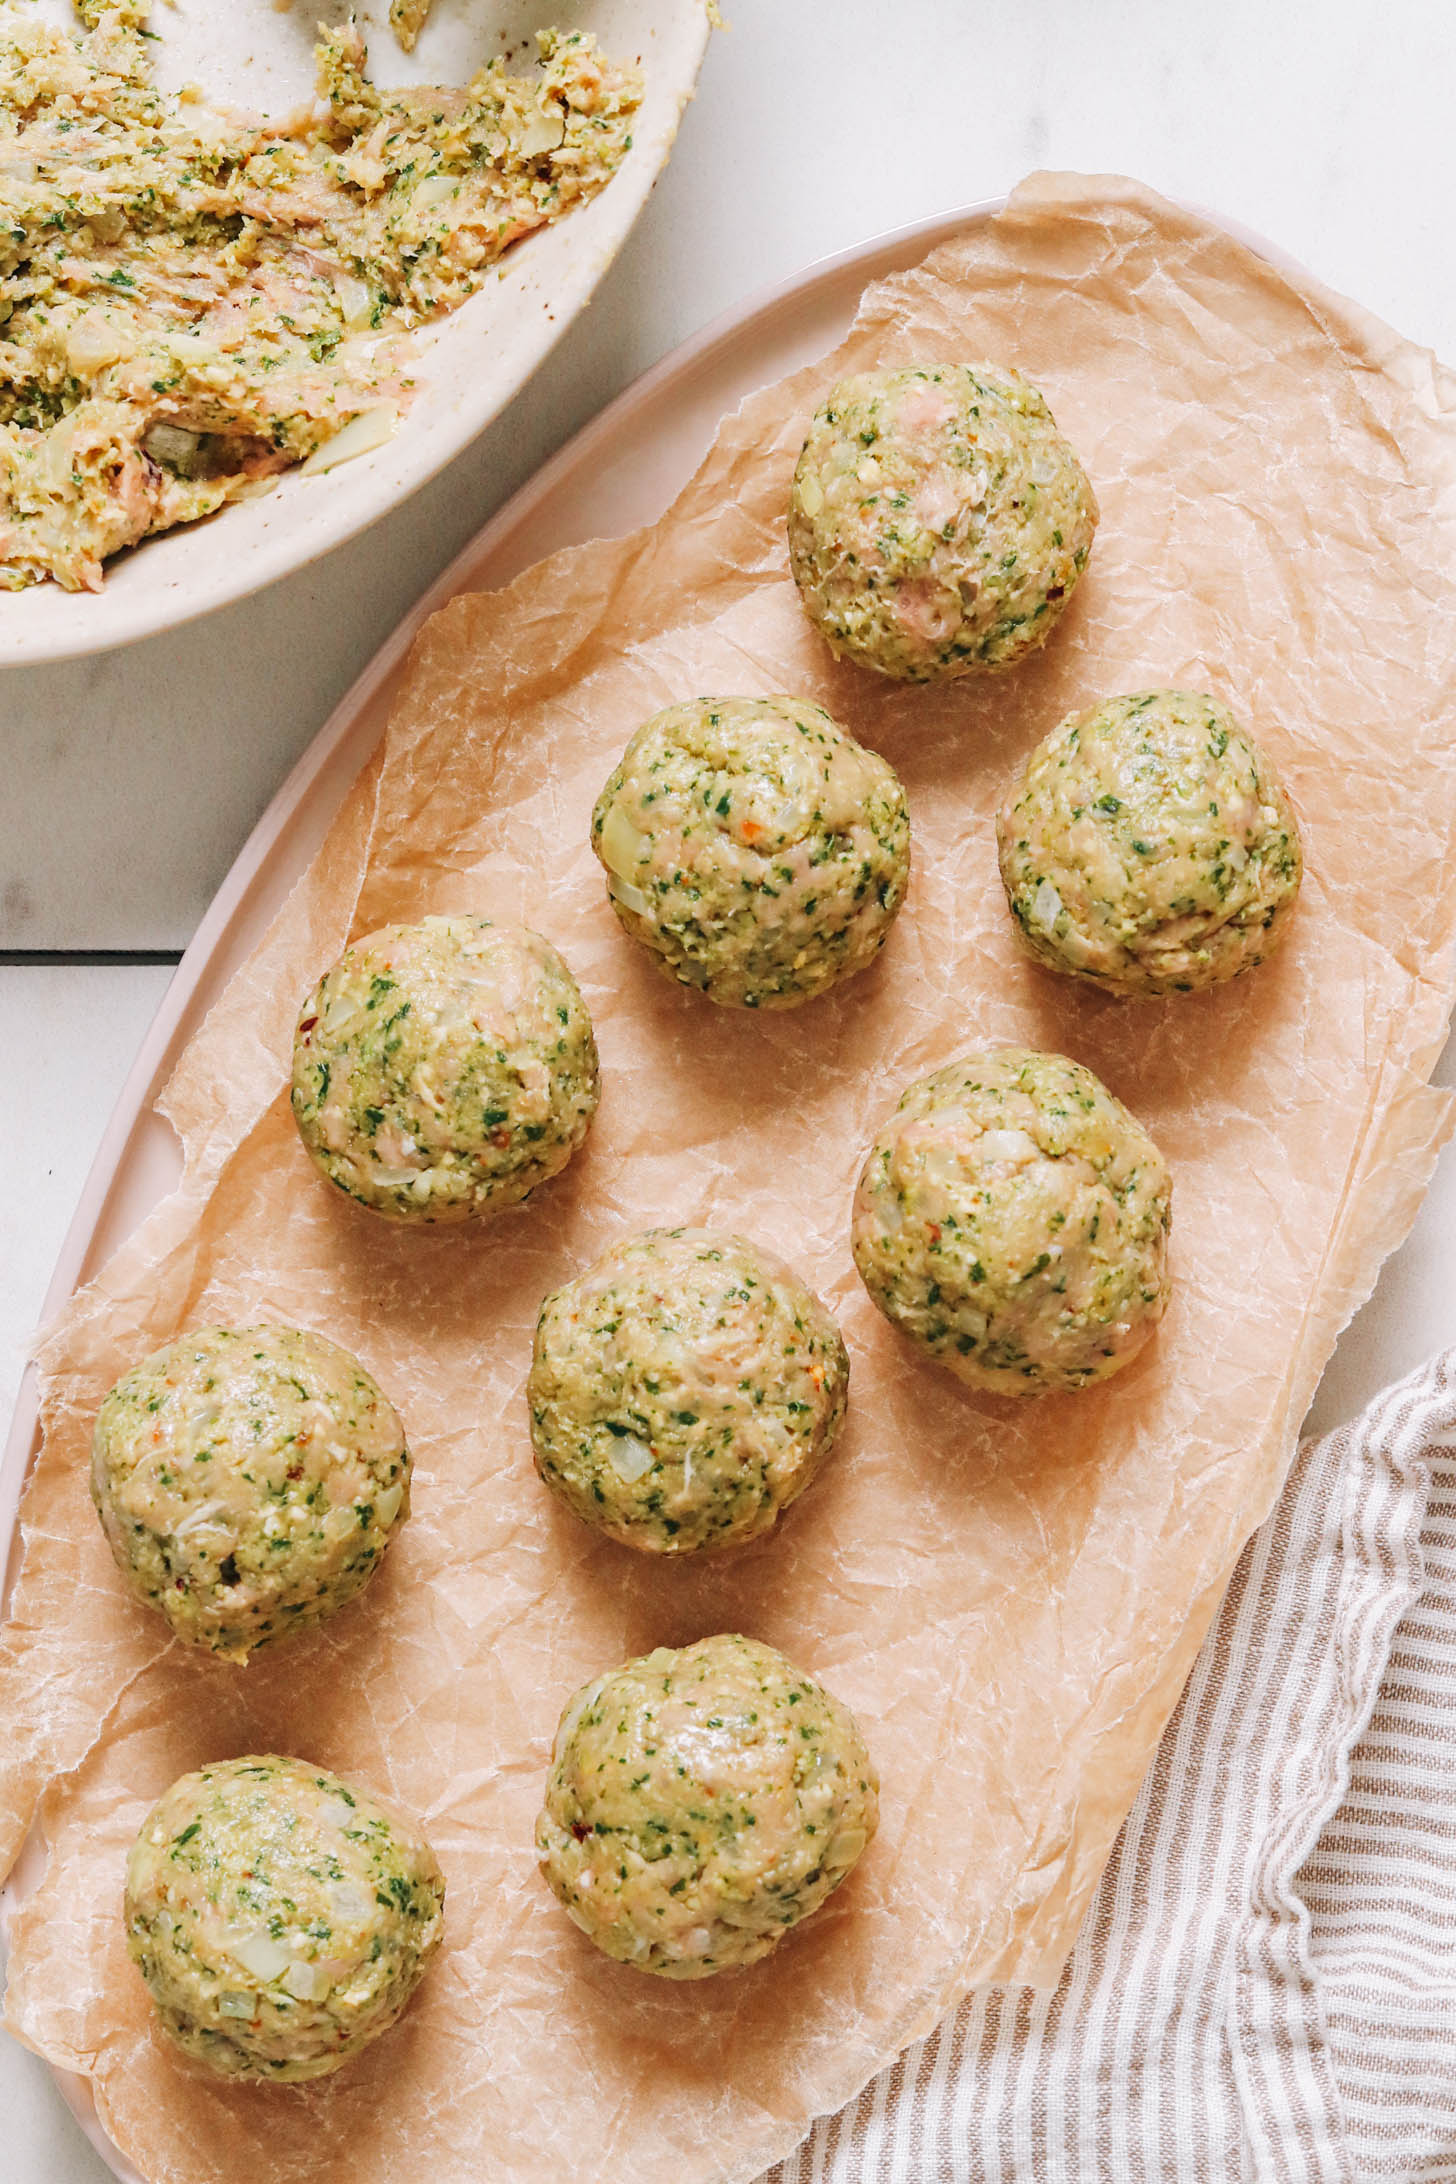 Pesto turkey meatballs on a plate before cooking